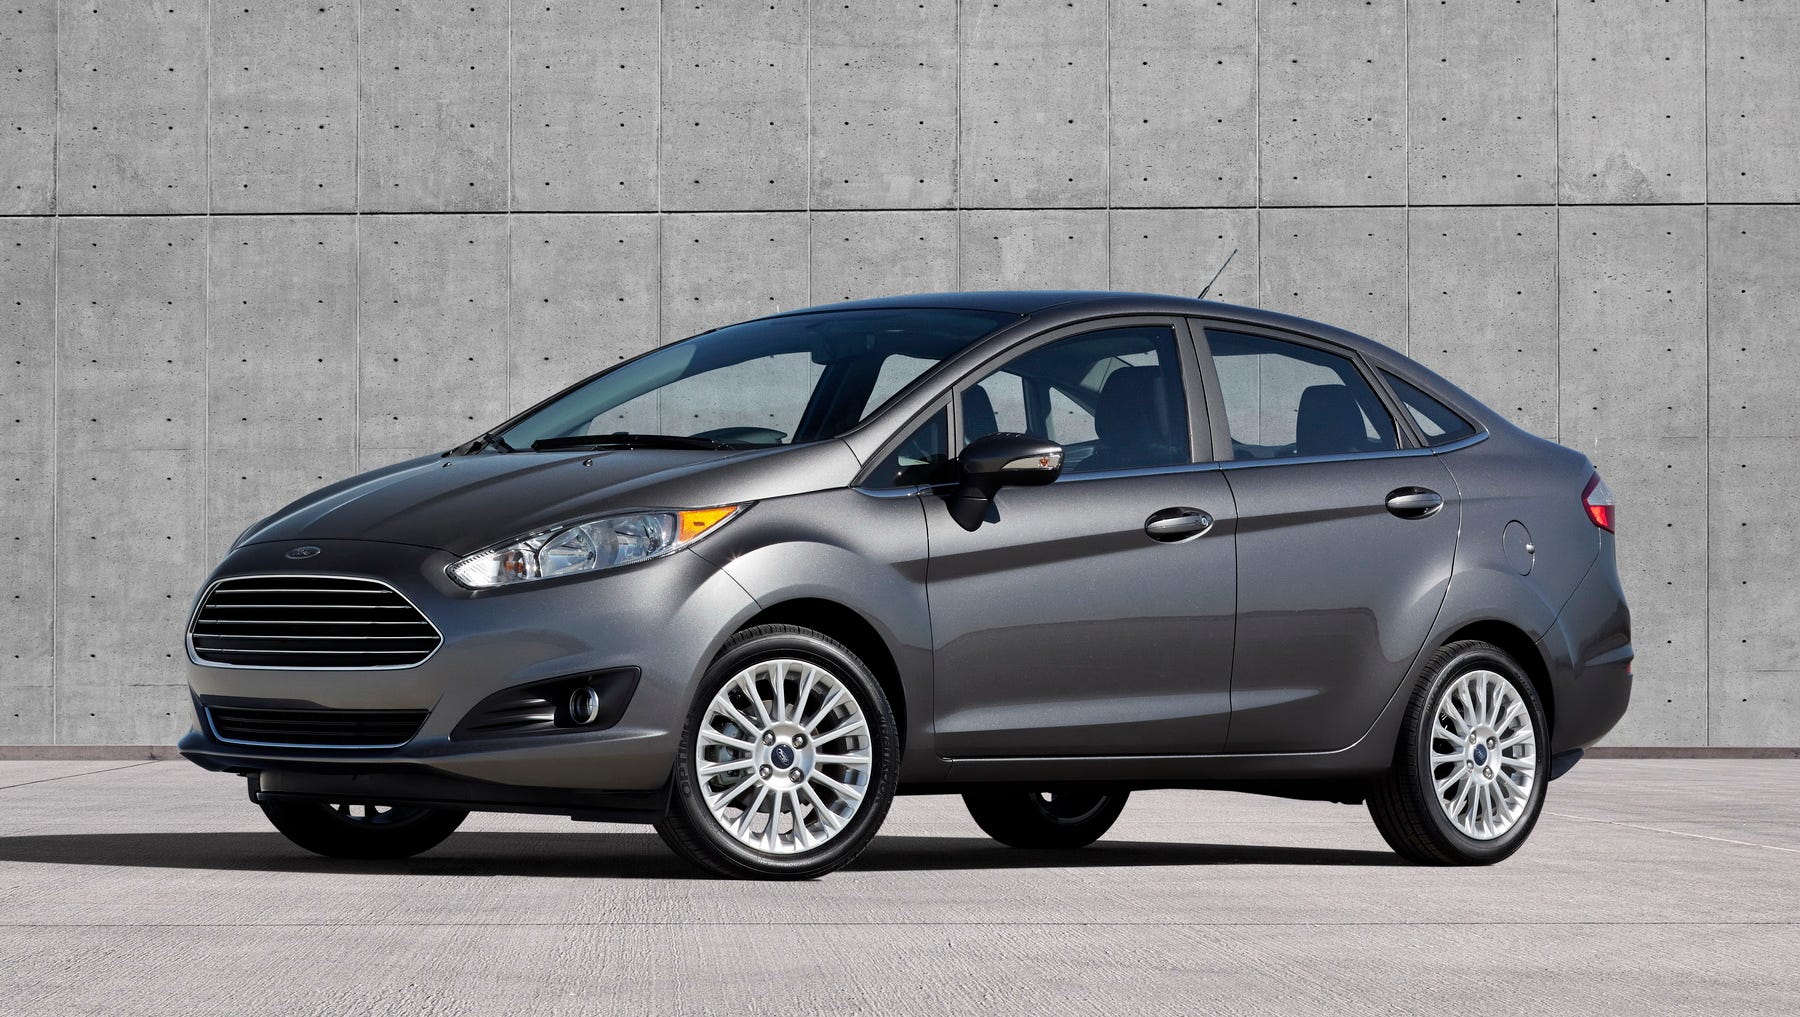 2015 Ford Fiesta lots of fun in small package